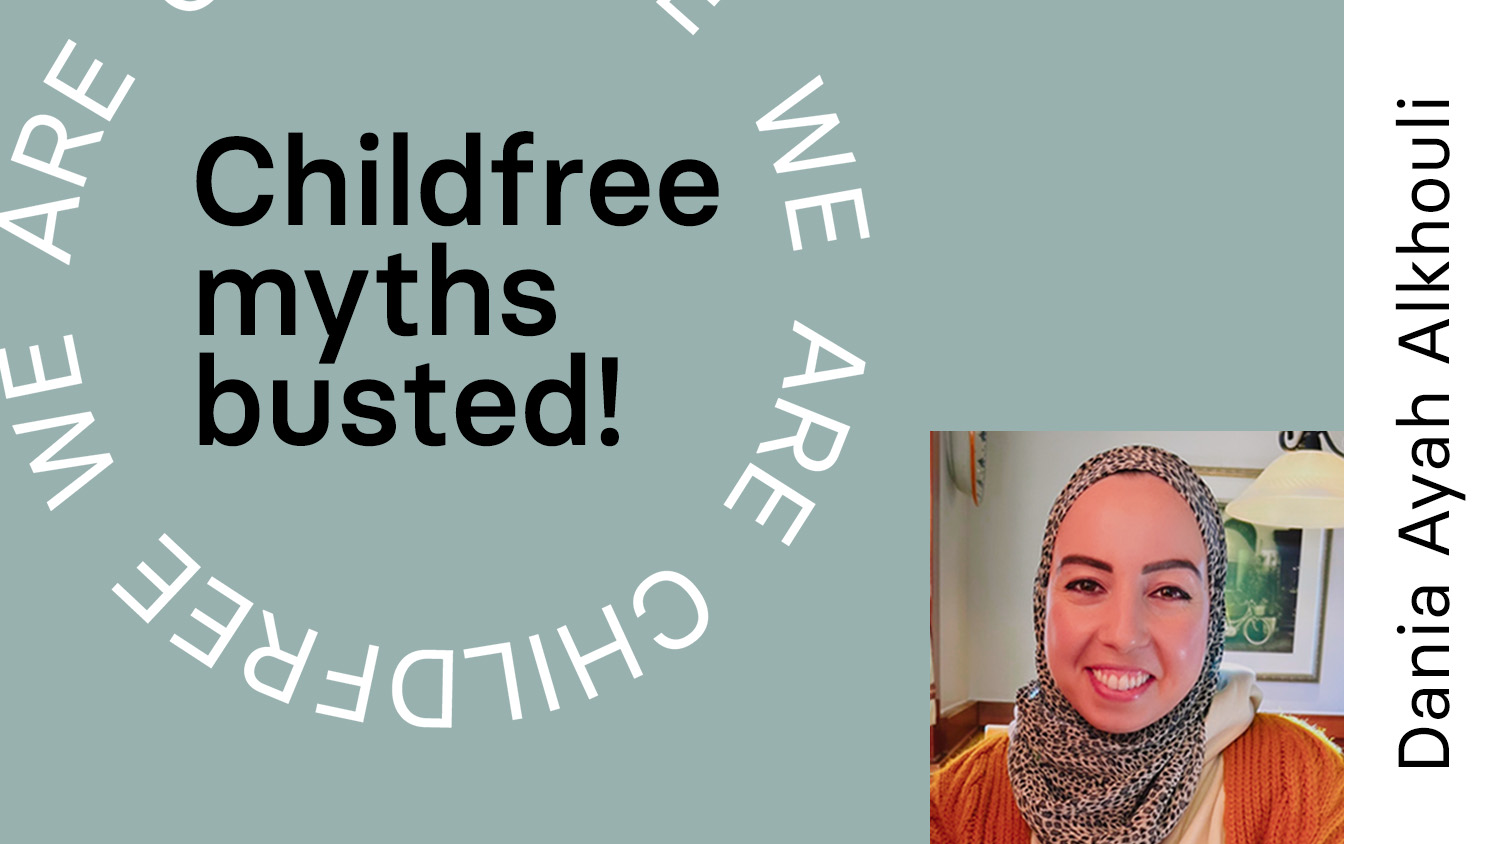 Childfree myths busted